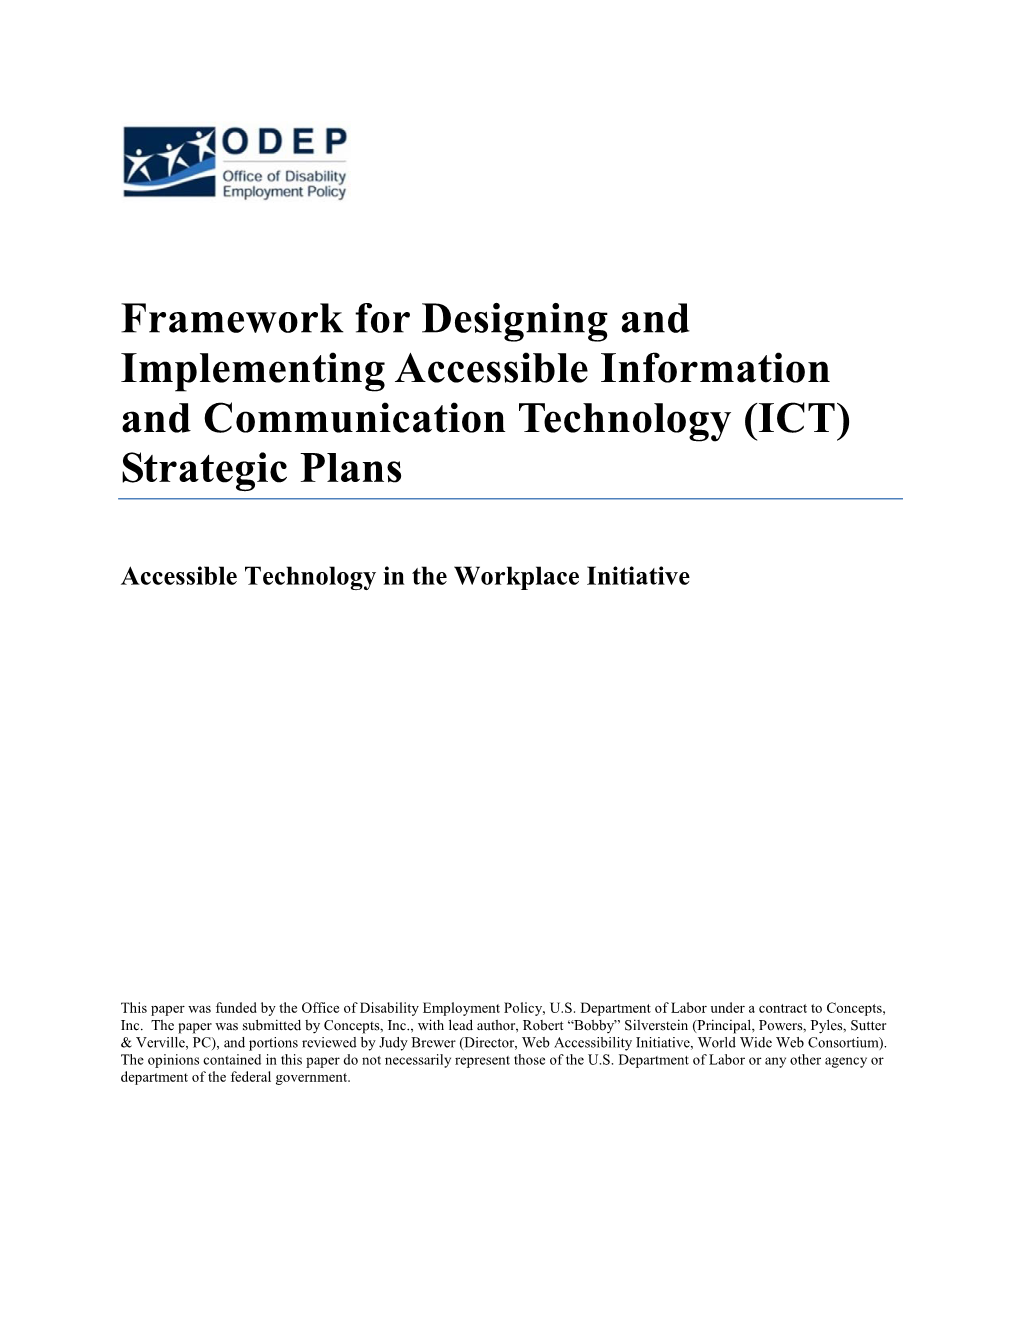 Framework for Designing and Implementing Accessible Information and Communication Technology (ICT) Strategic Plans